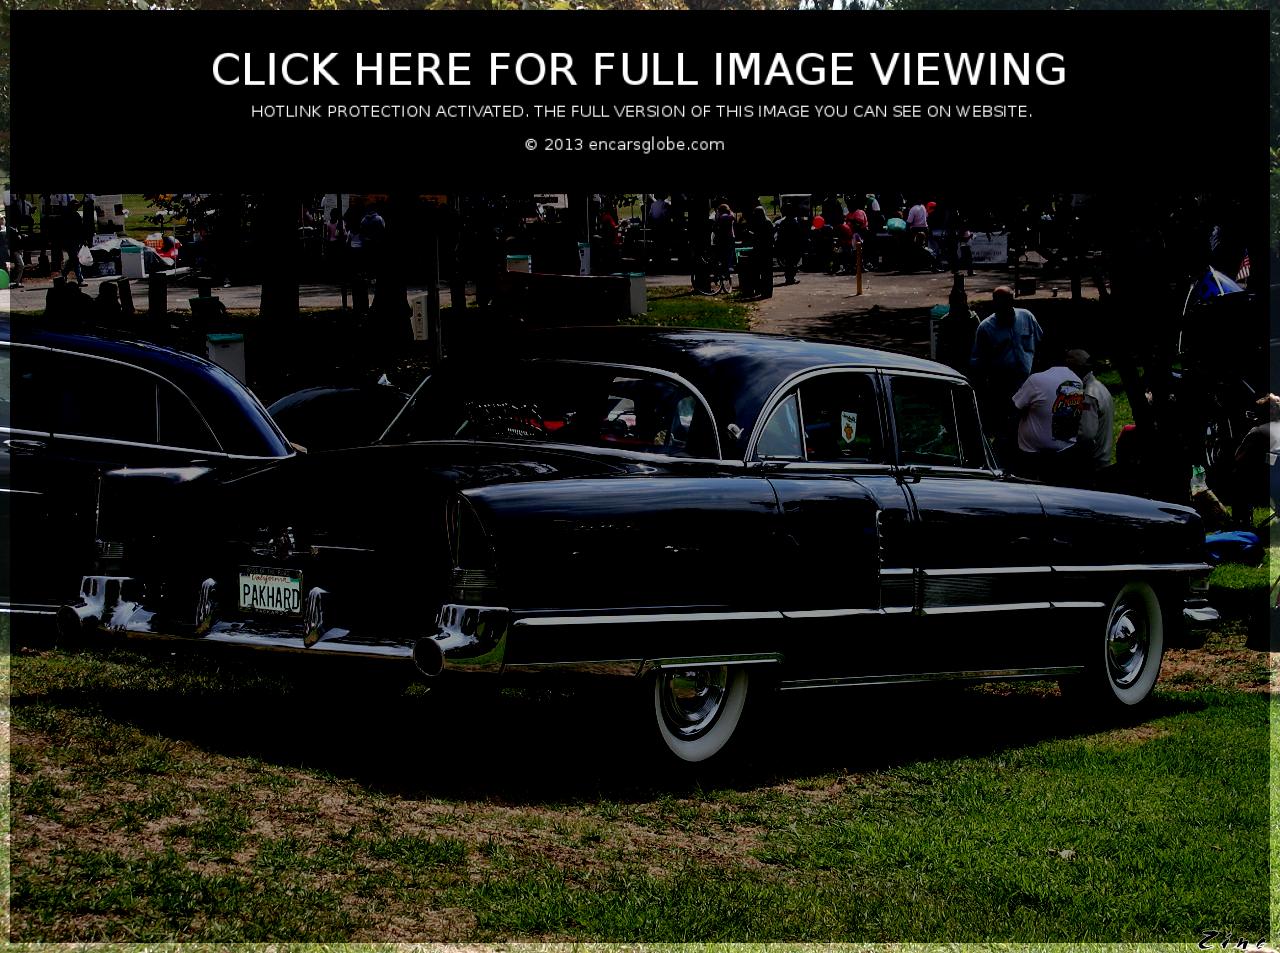 Packard 1201 Cabriolet Photo Gallery: Photo #10 out of 9, Image ...